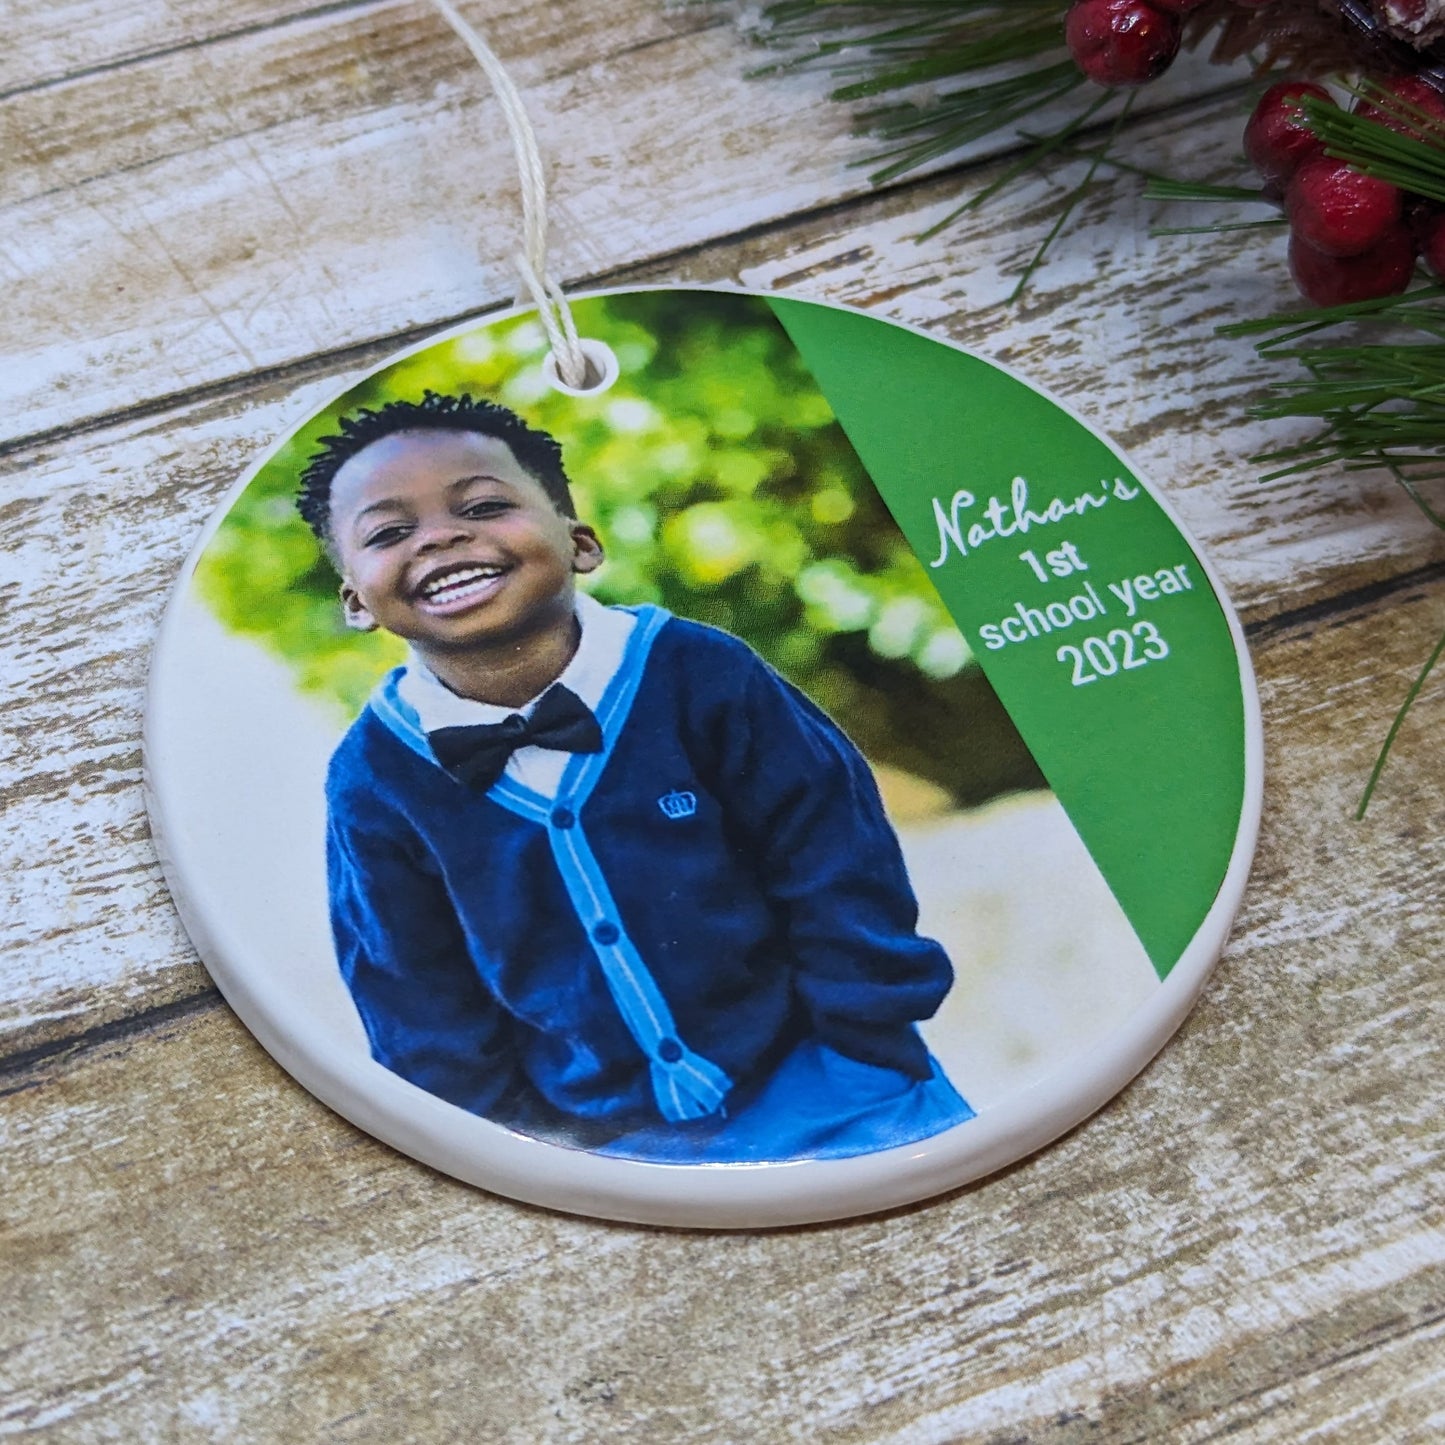 Ornament First School Year, Ceramic Ornament, Personalized Child Ornament - your photo and Child's name 1st School Year Ornament